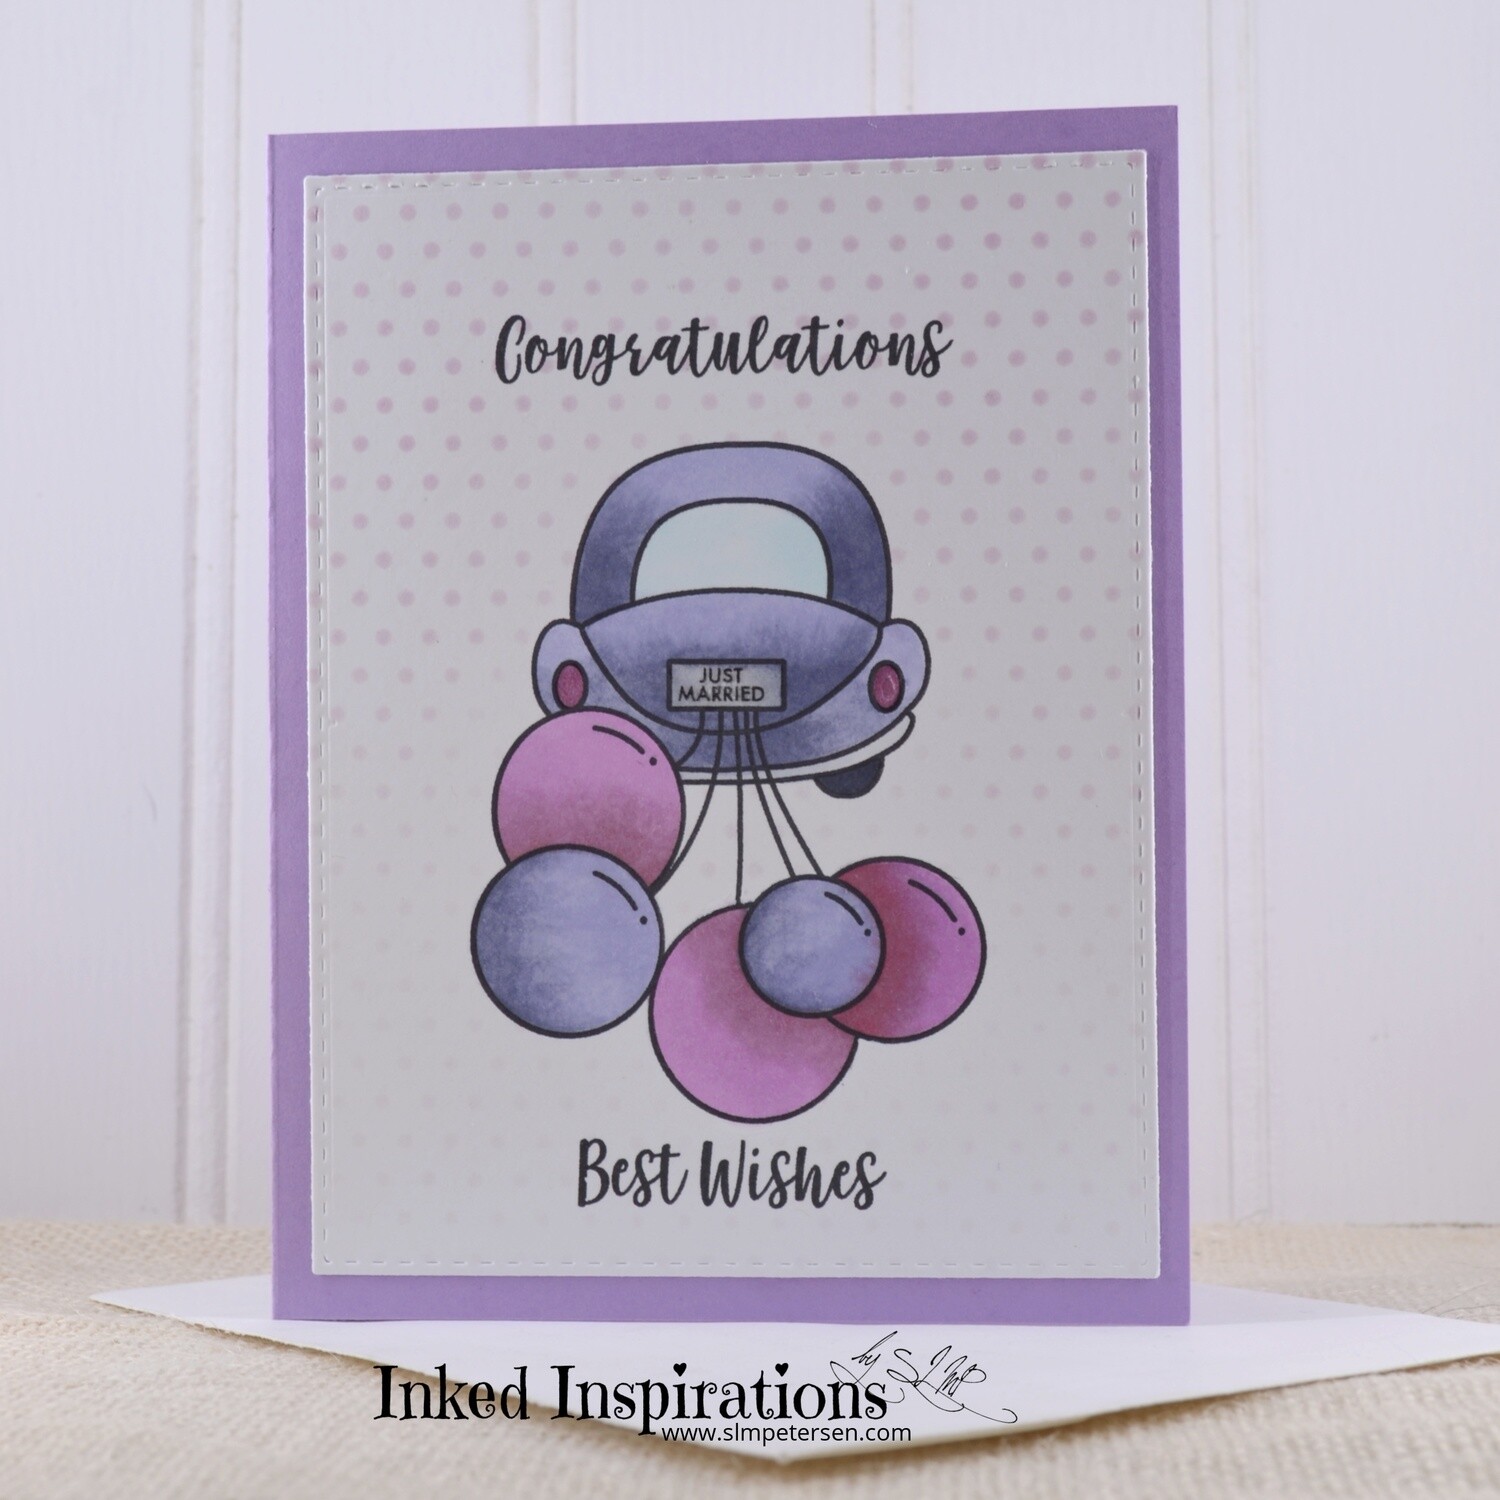 Congratulations Best Wishes - Purple Car & Balloons